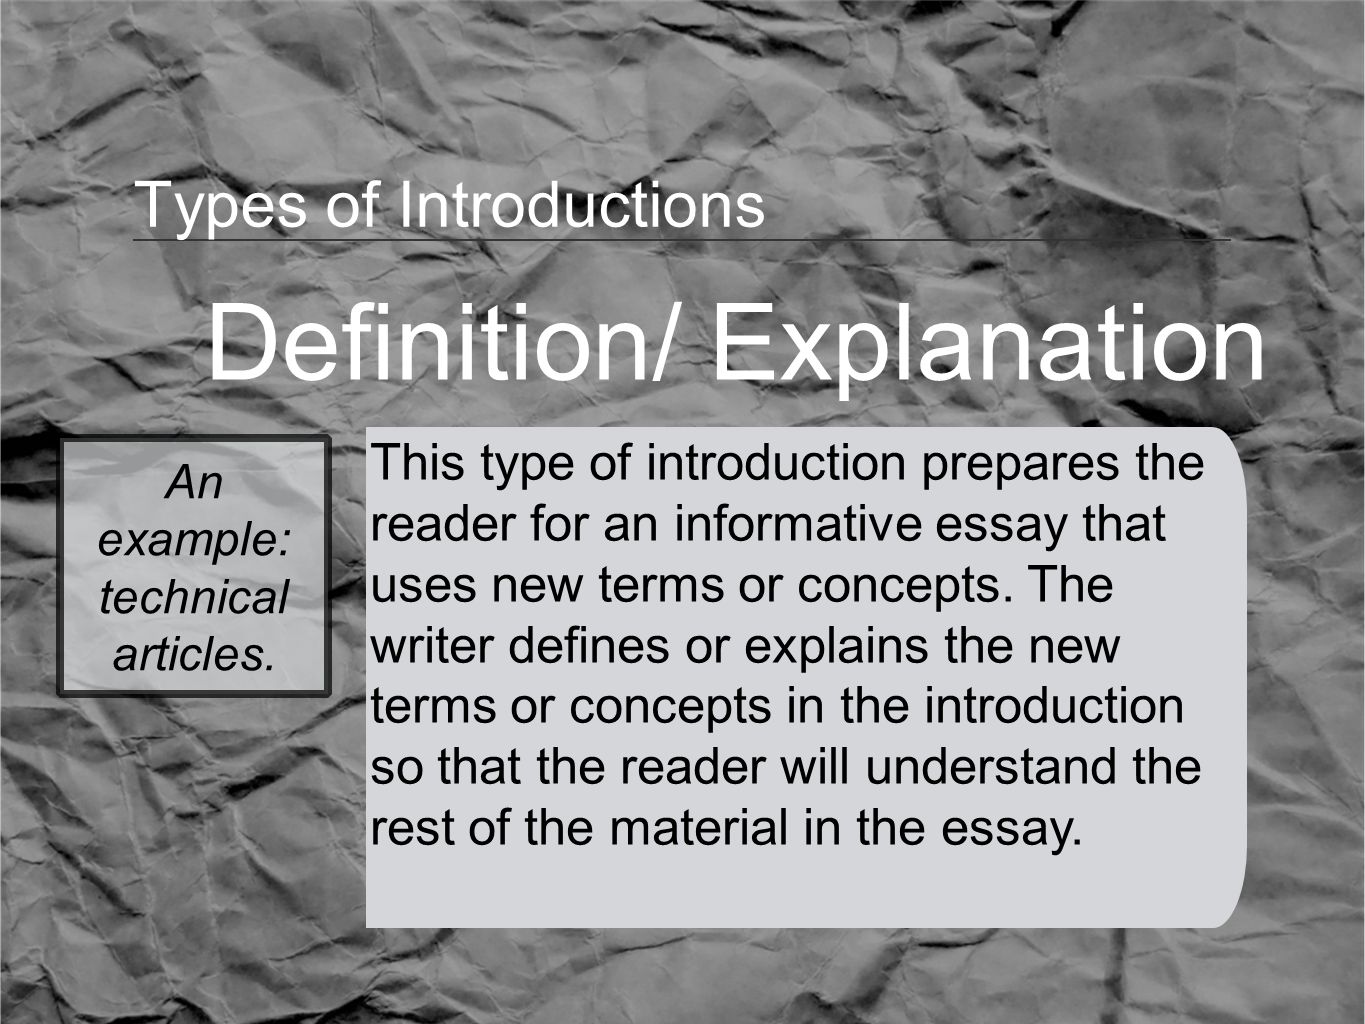 Types of Introductions Definition/ Explanation This type of introduction prepares the reader for an informative essay that uses new terms or concepts.